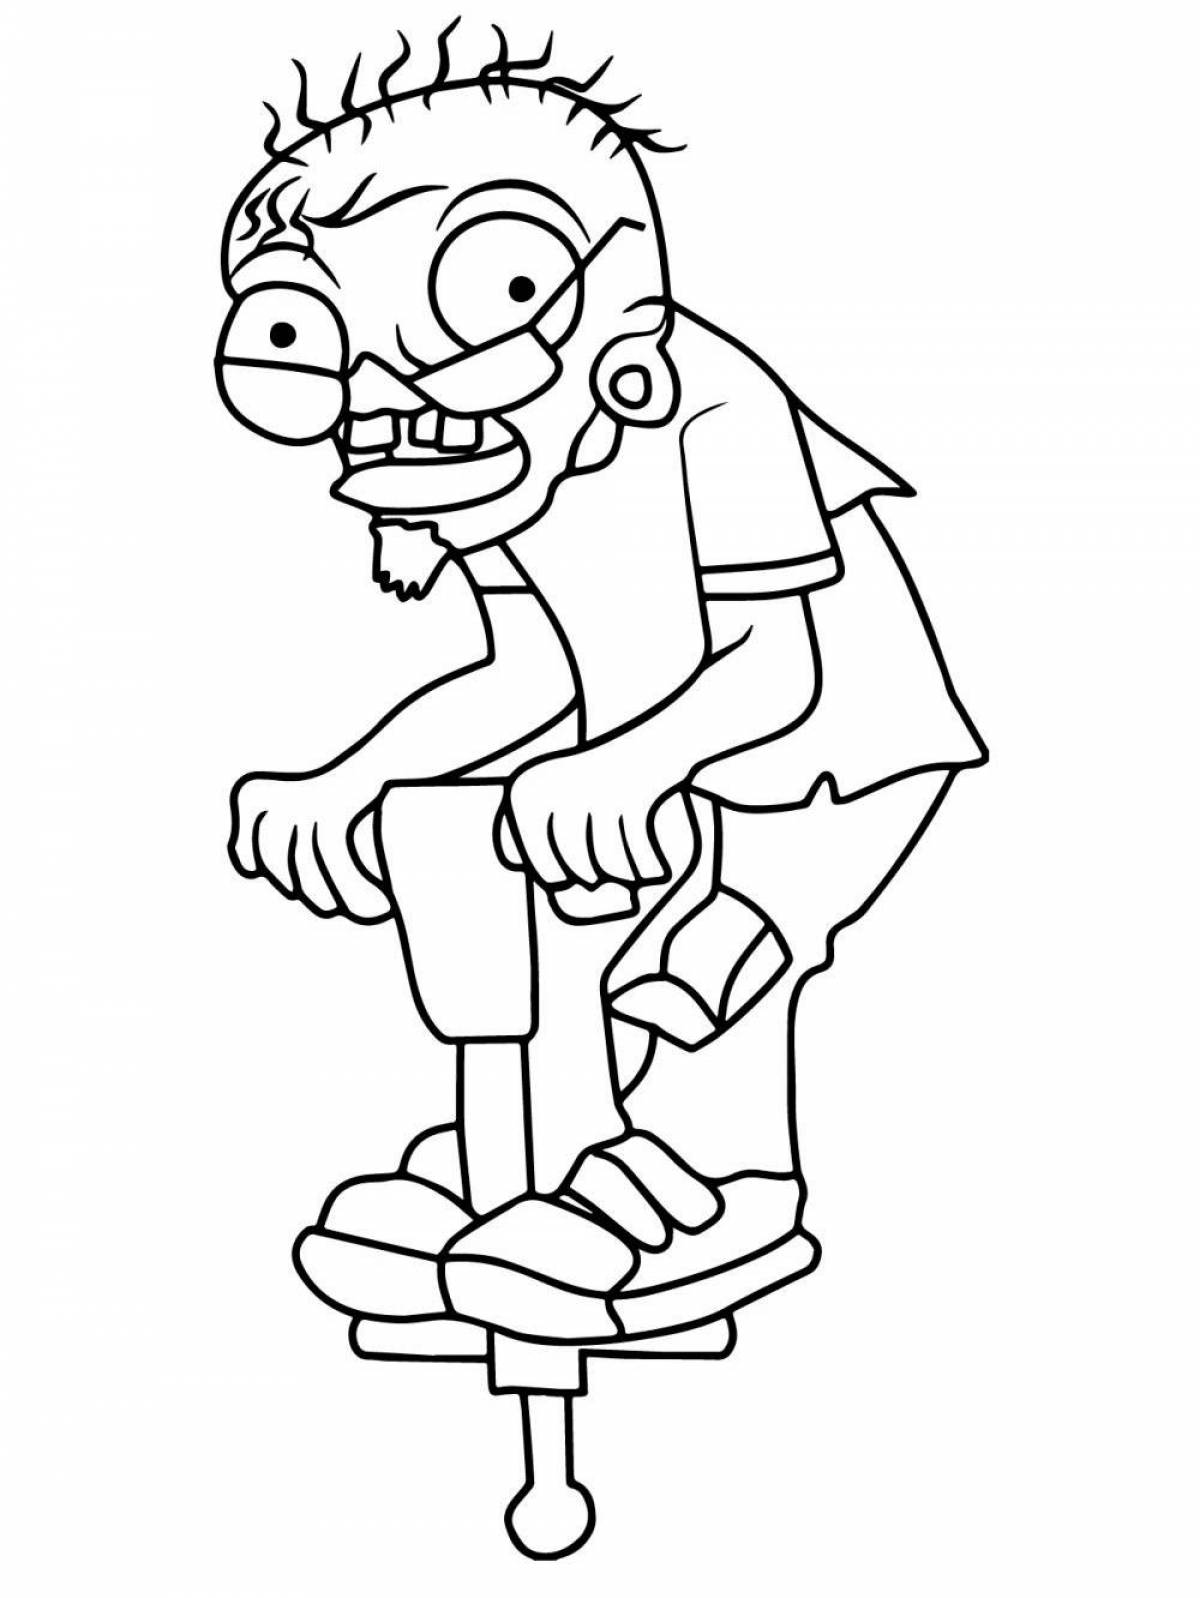 Disgusting zombie coloring book